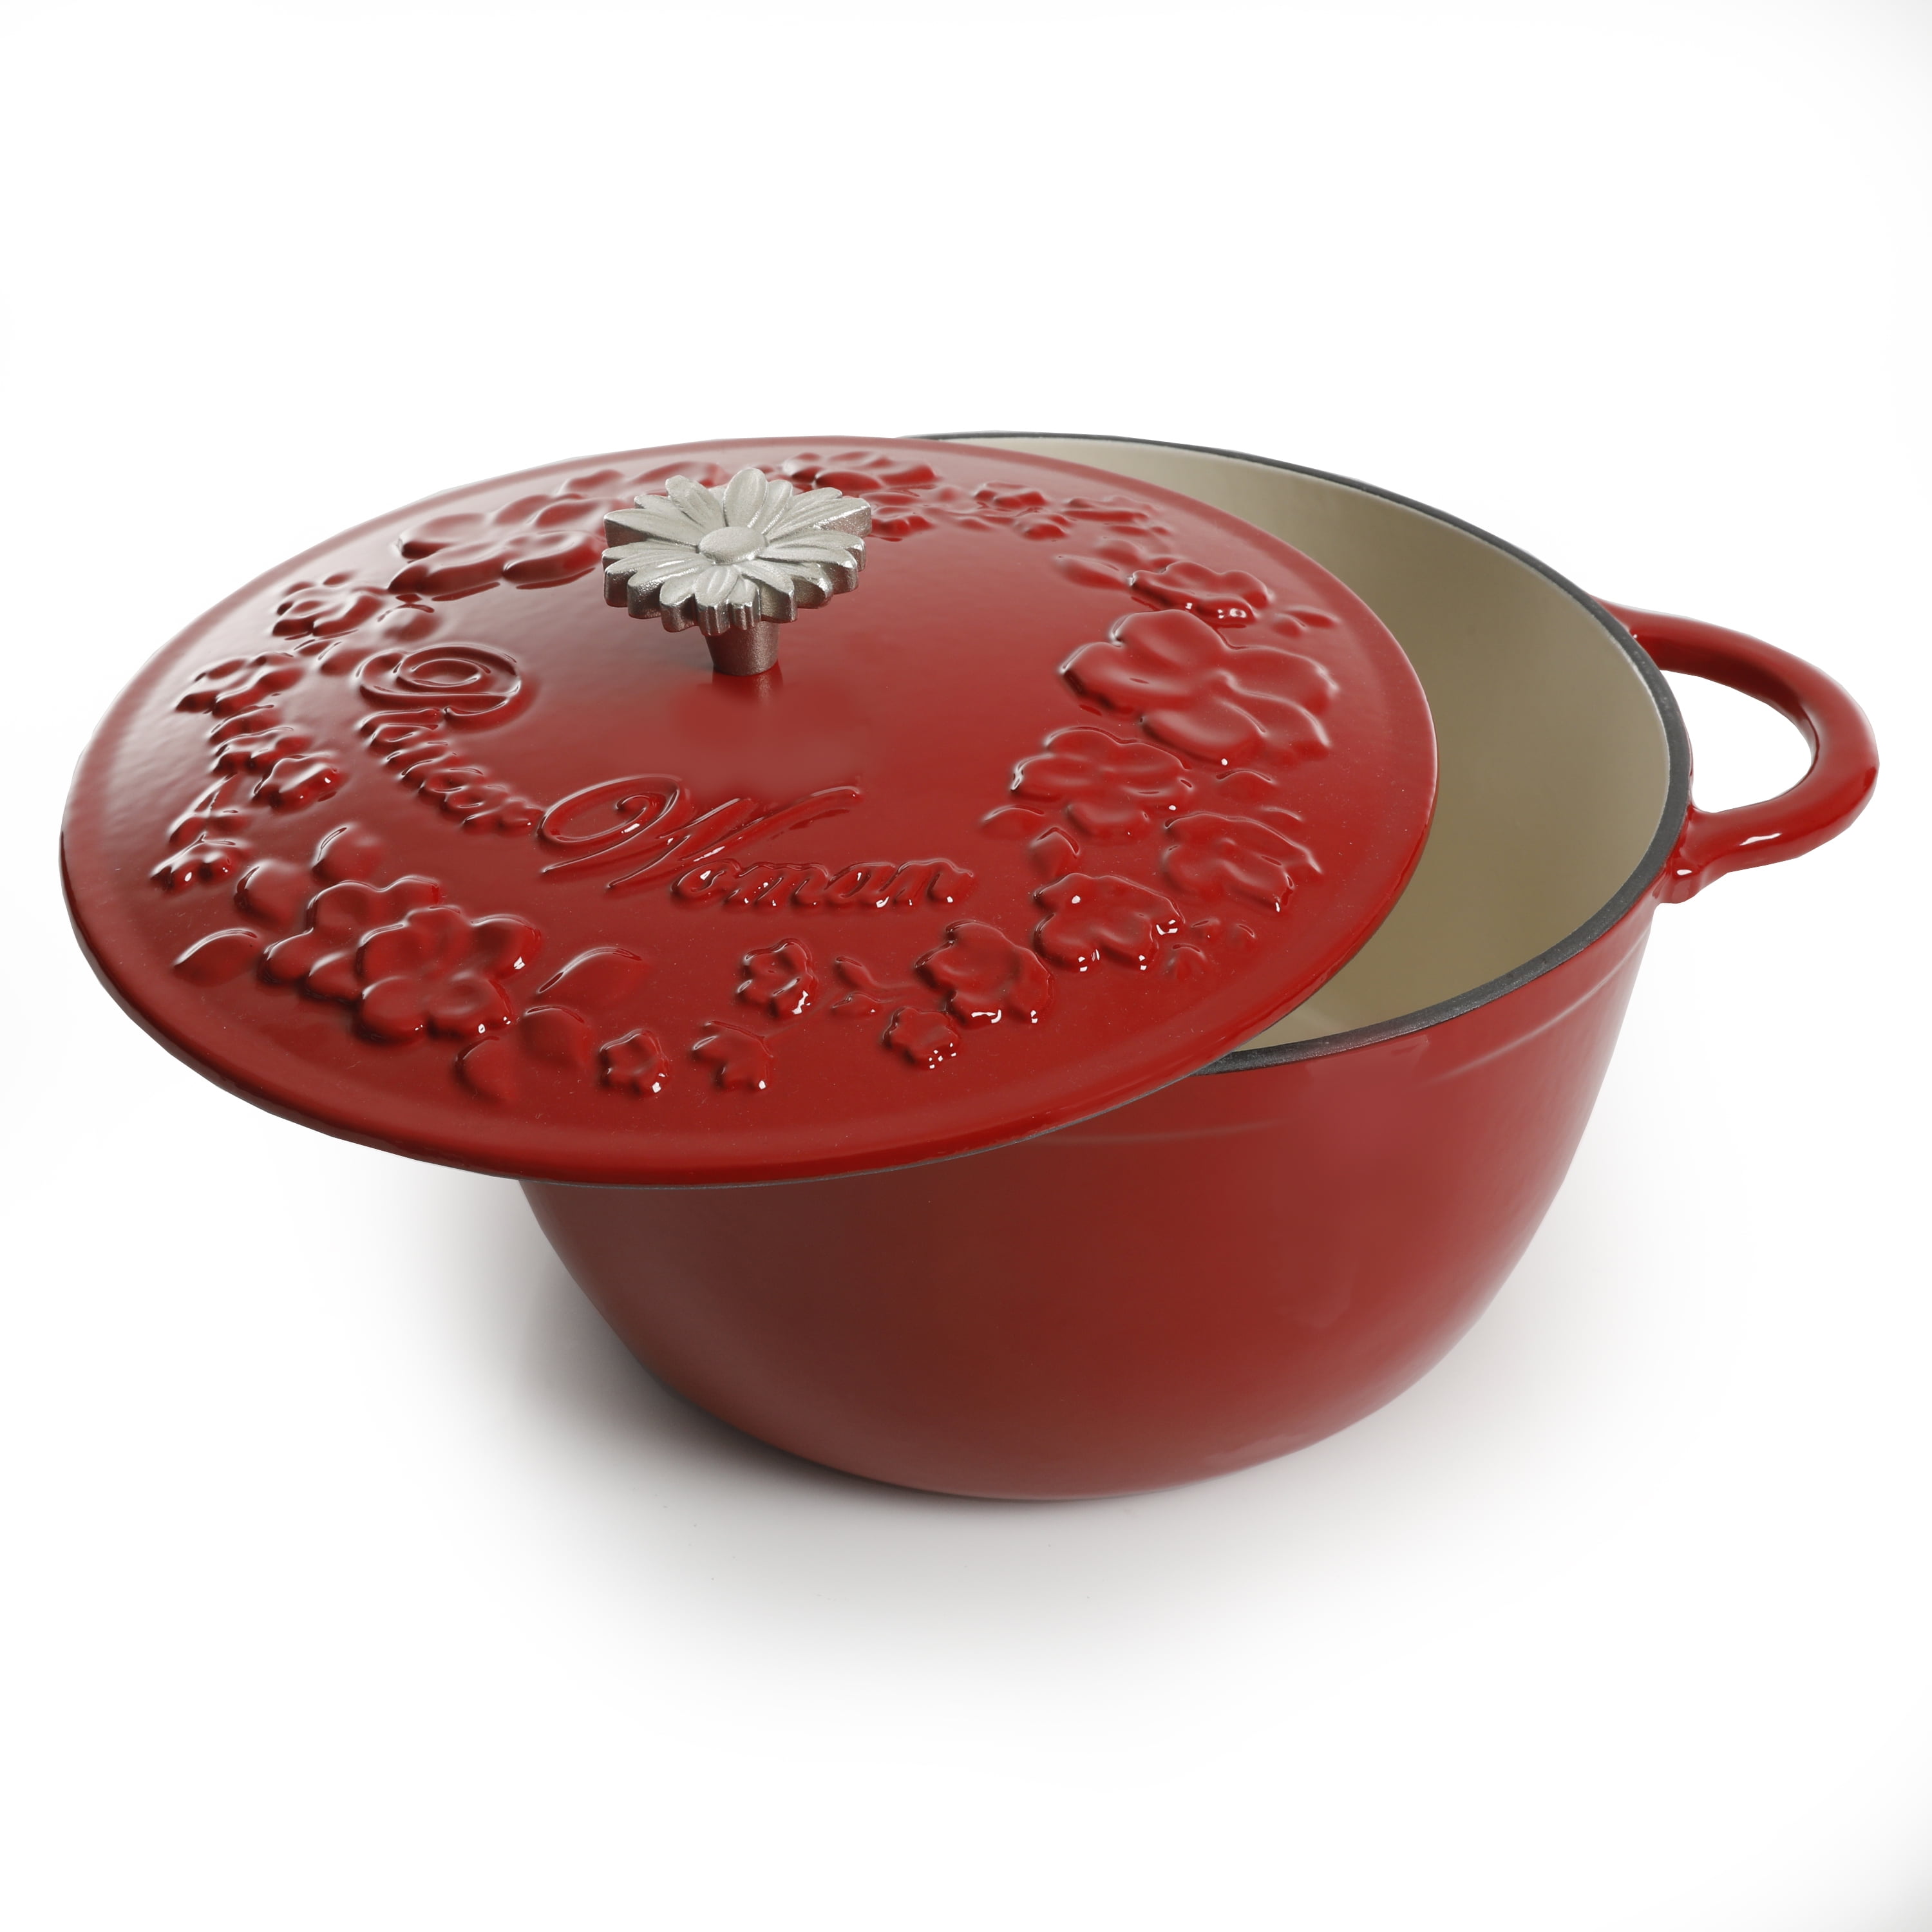 Eternal Living Enameled Cast Iron Dutch Oven with Handles and Lid, 5 Quart  Red